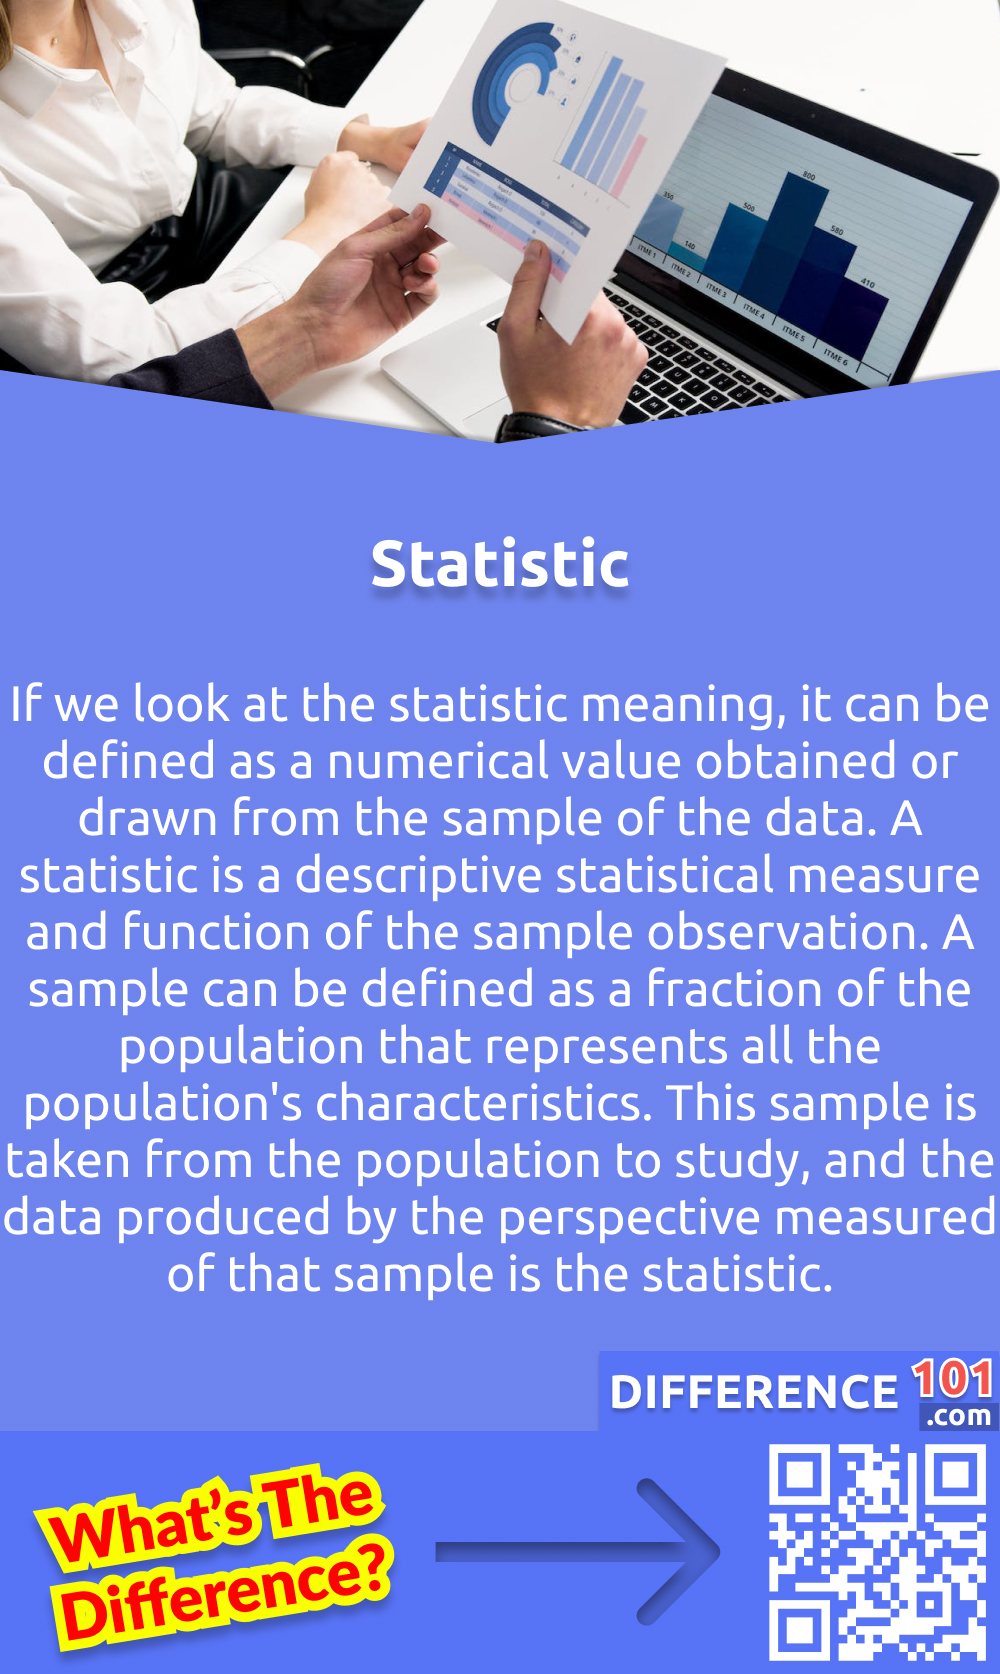 What Is Statistic? If we look at the statistic meaning, it can be defined as a numerical value obtained or drawn from the sample of the data. A statistic is a descriptive statistical measure and function of the sample observation. A sample can be defined as a fraction of the population that represents all the population's characteristics. This sample is taken from the population to study, and the data produced by the perspective measured of that sample is the statistic. The sample has almost all the inferred population characteristics because it is impossible to study the entire population. Statistic is also famous for being a "sample statistic" because it is drawn from the sample. The sample statistic is used to collect information about every individual. However, the data may vary from sample to sample.